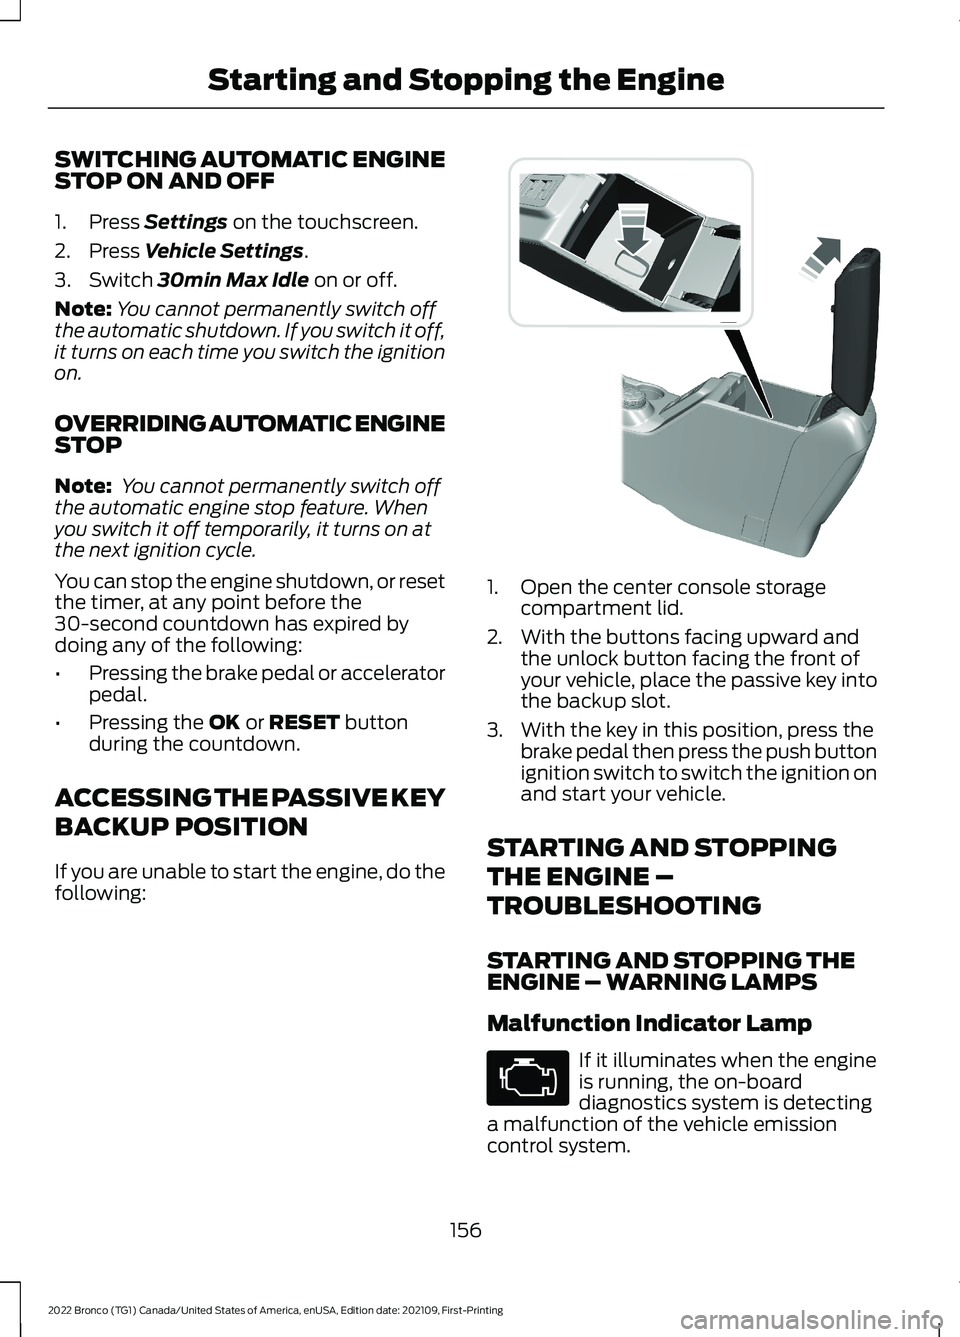 FORD BRONCO 2022 User Guide SWITCHING AUTOMATIC ENGINESTOP ON AND OFF
1.Press Settings on the touchscreen.
2.Press Vehicle Settings.
3.Switch 30min Max Idle on or off.
Note:You cannot permanently switch offthe automatic shutdown